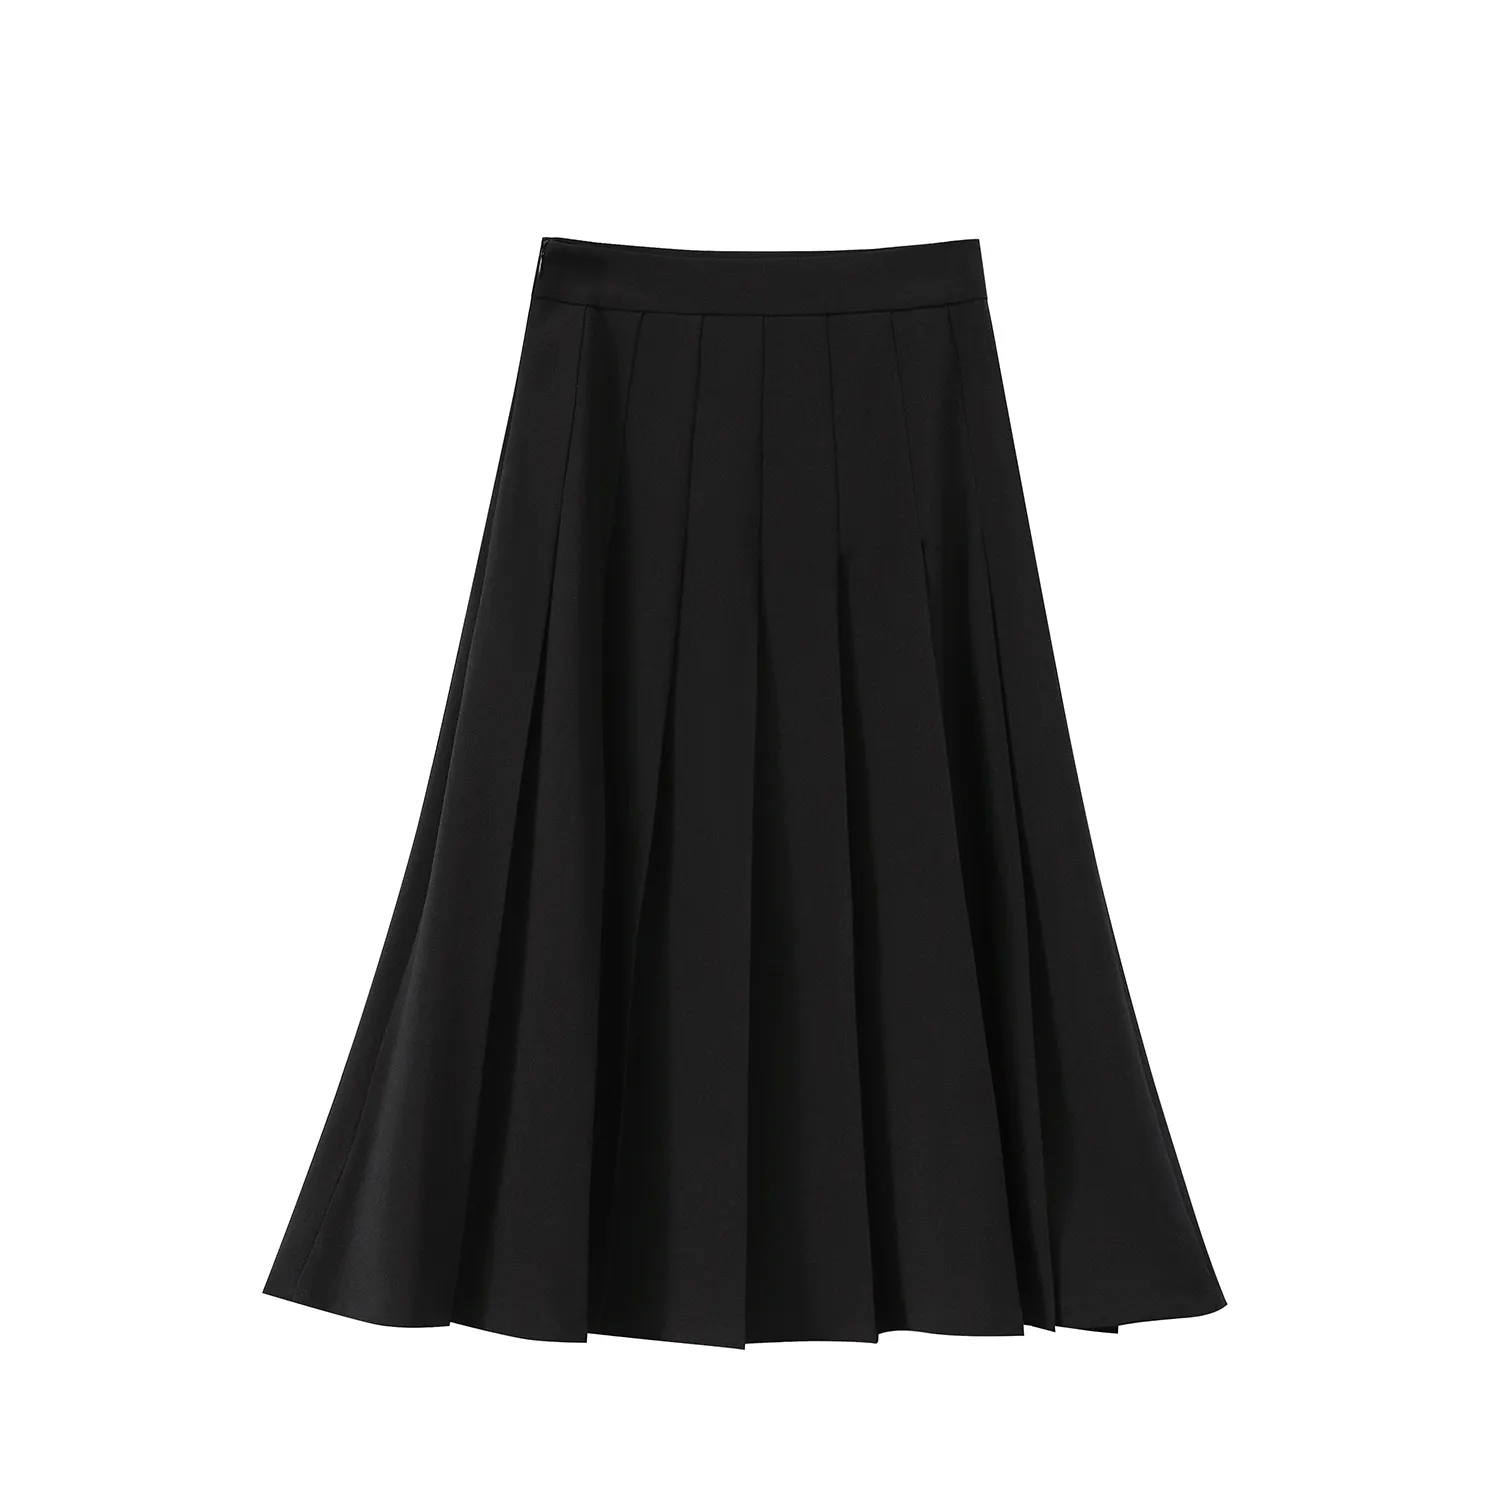 Hot Sale Summer Black Dresses Fashion Solid Color Drape Style Pleated Skirt Women's Clothing